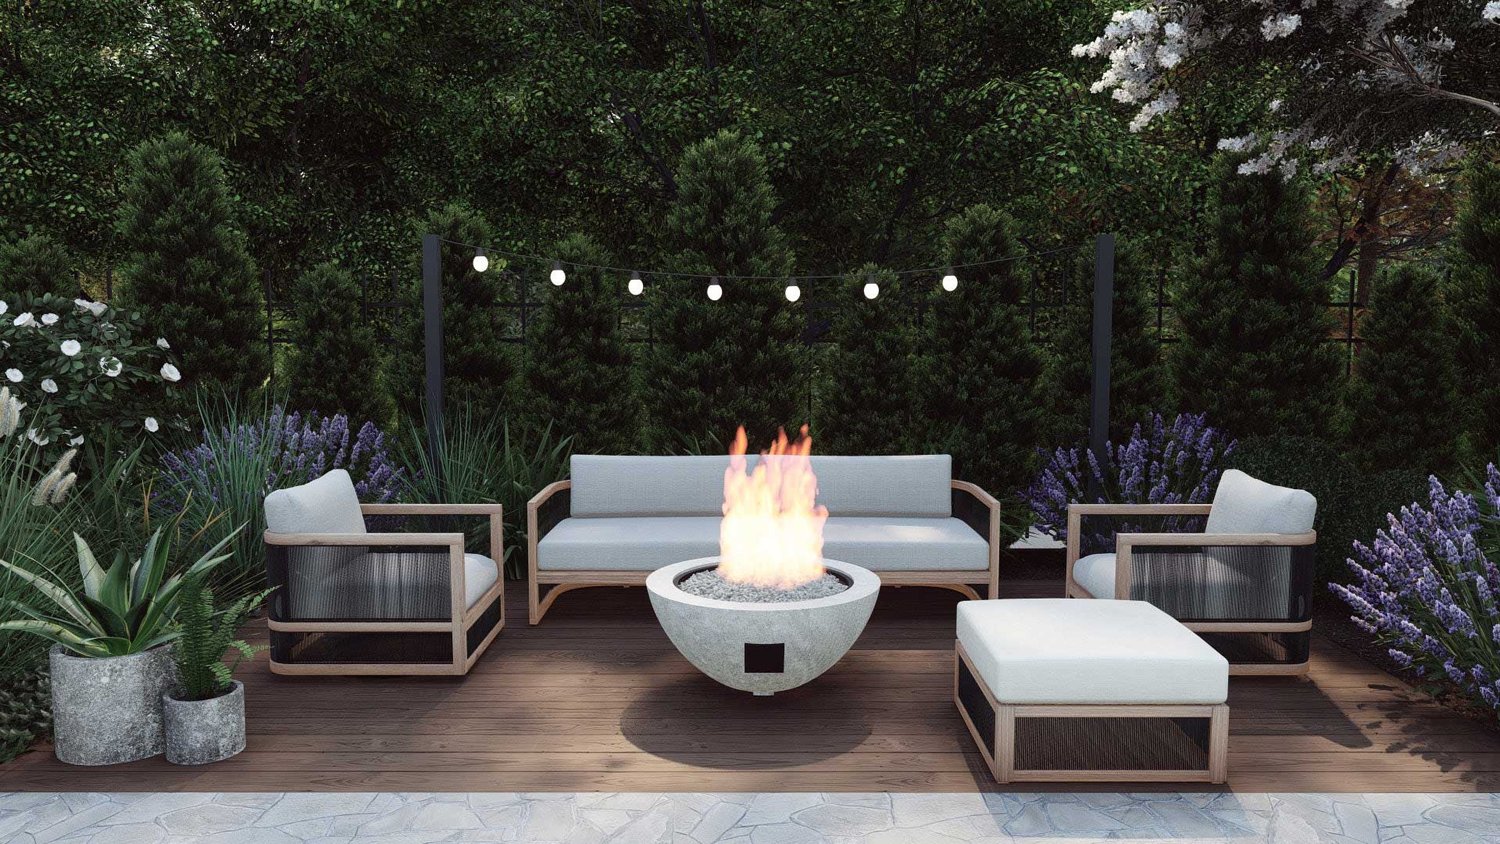 Ocean City wooden floor patio with string lights above fire pit seating area in a garden